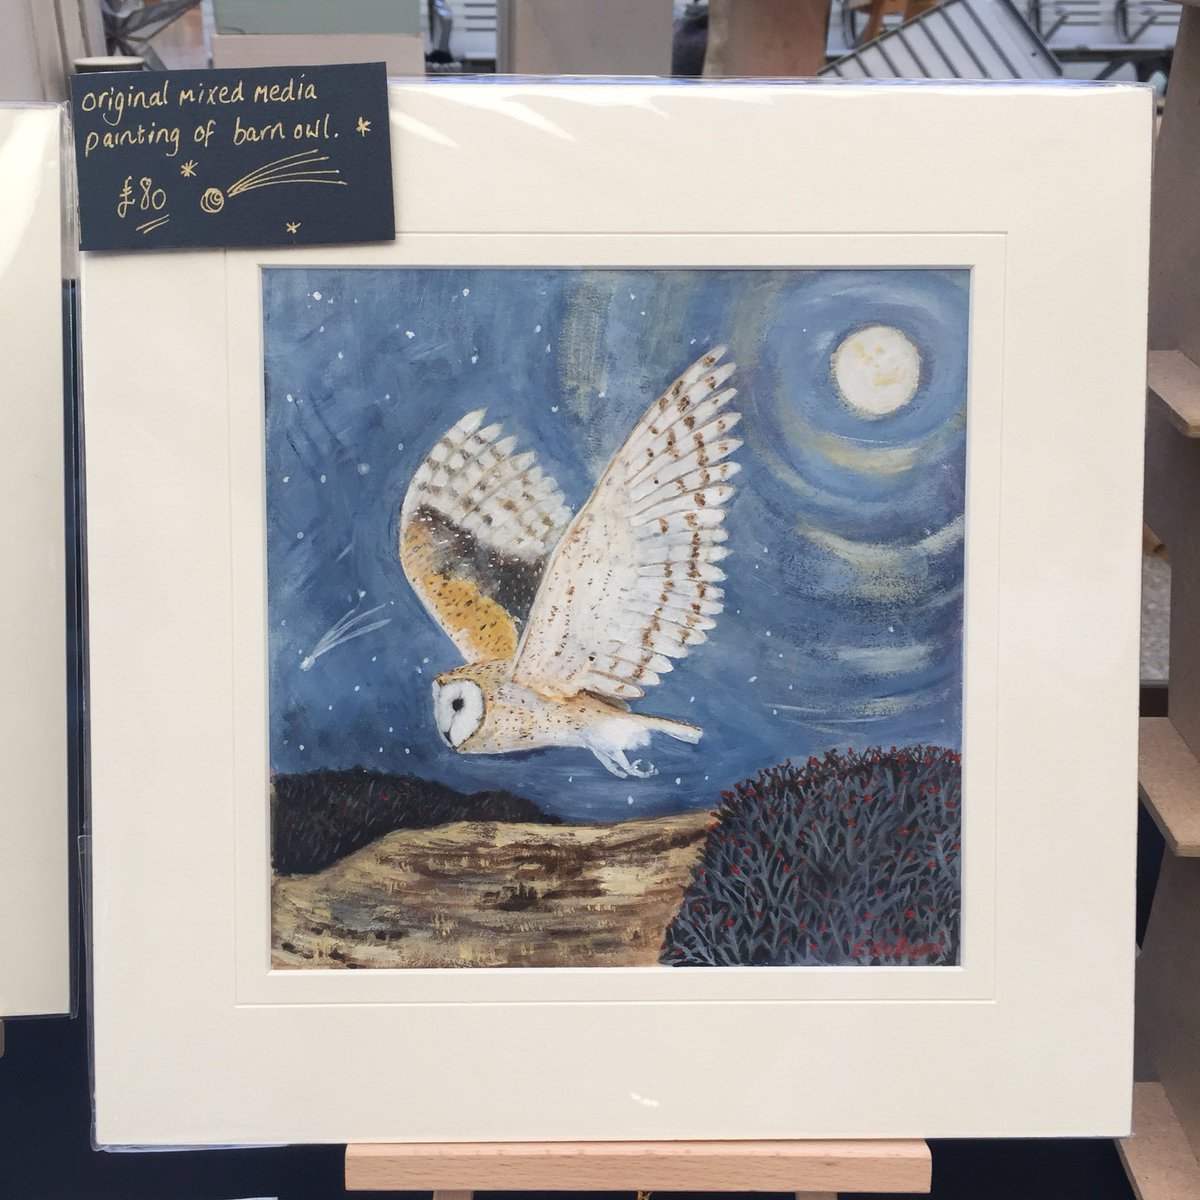 I still have this #barnowl painting for sale. Message me if you are interested.
#barnowlpainting #acrylicpainting